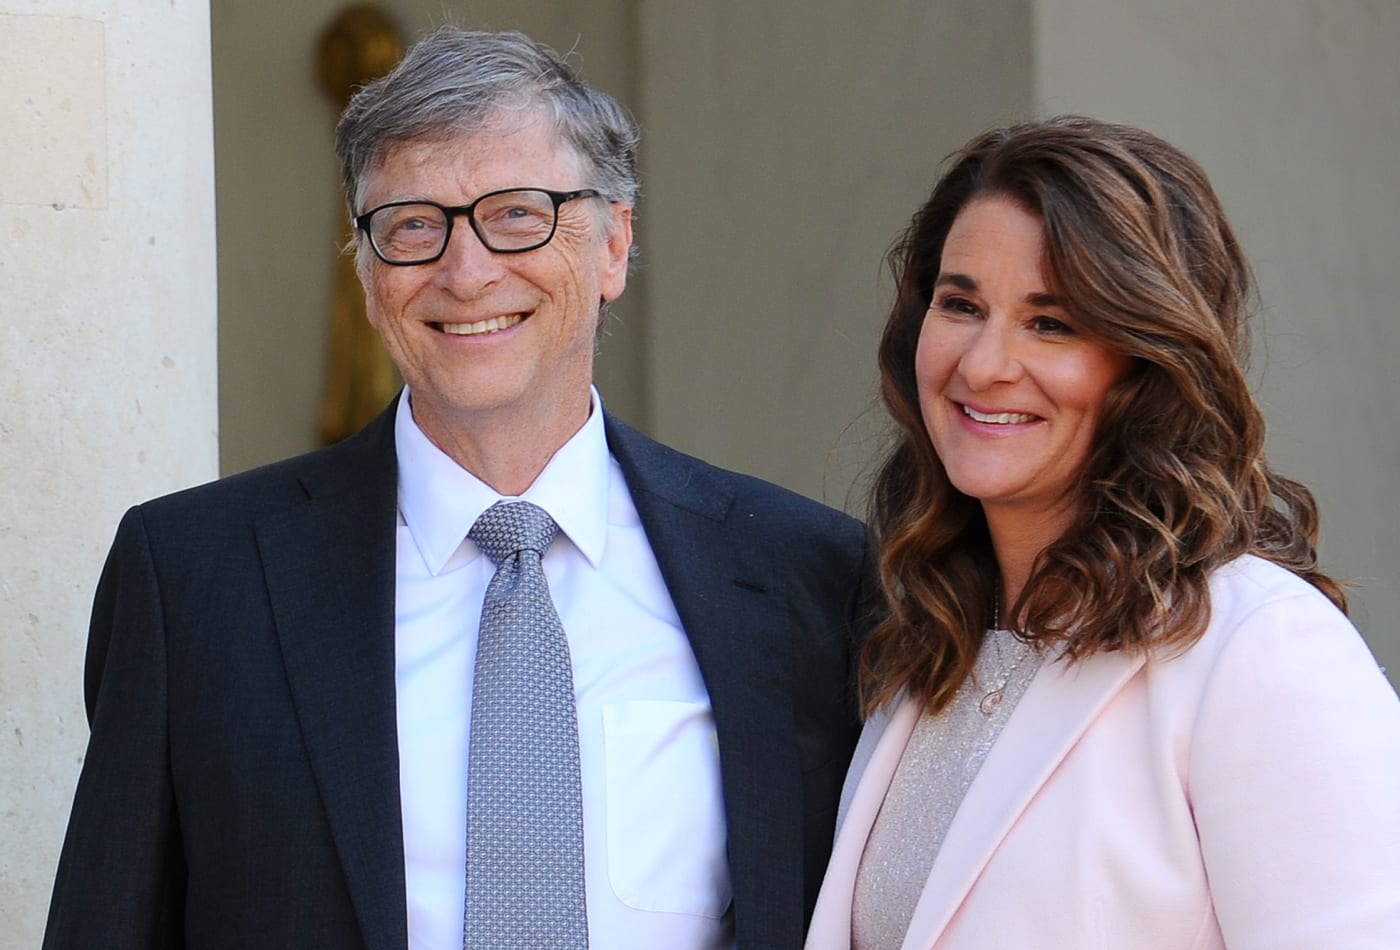 Bill and Melinda Gates stand together in formal attire.